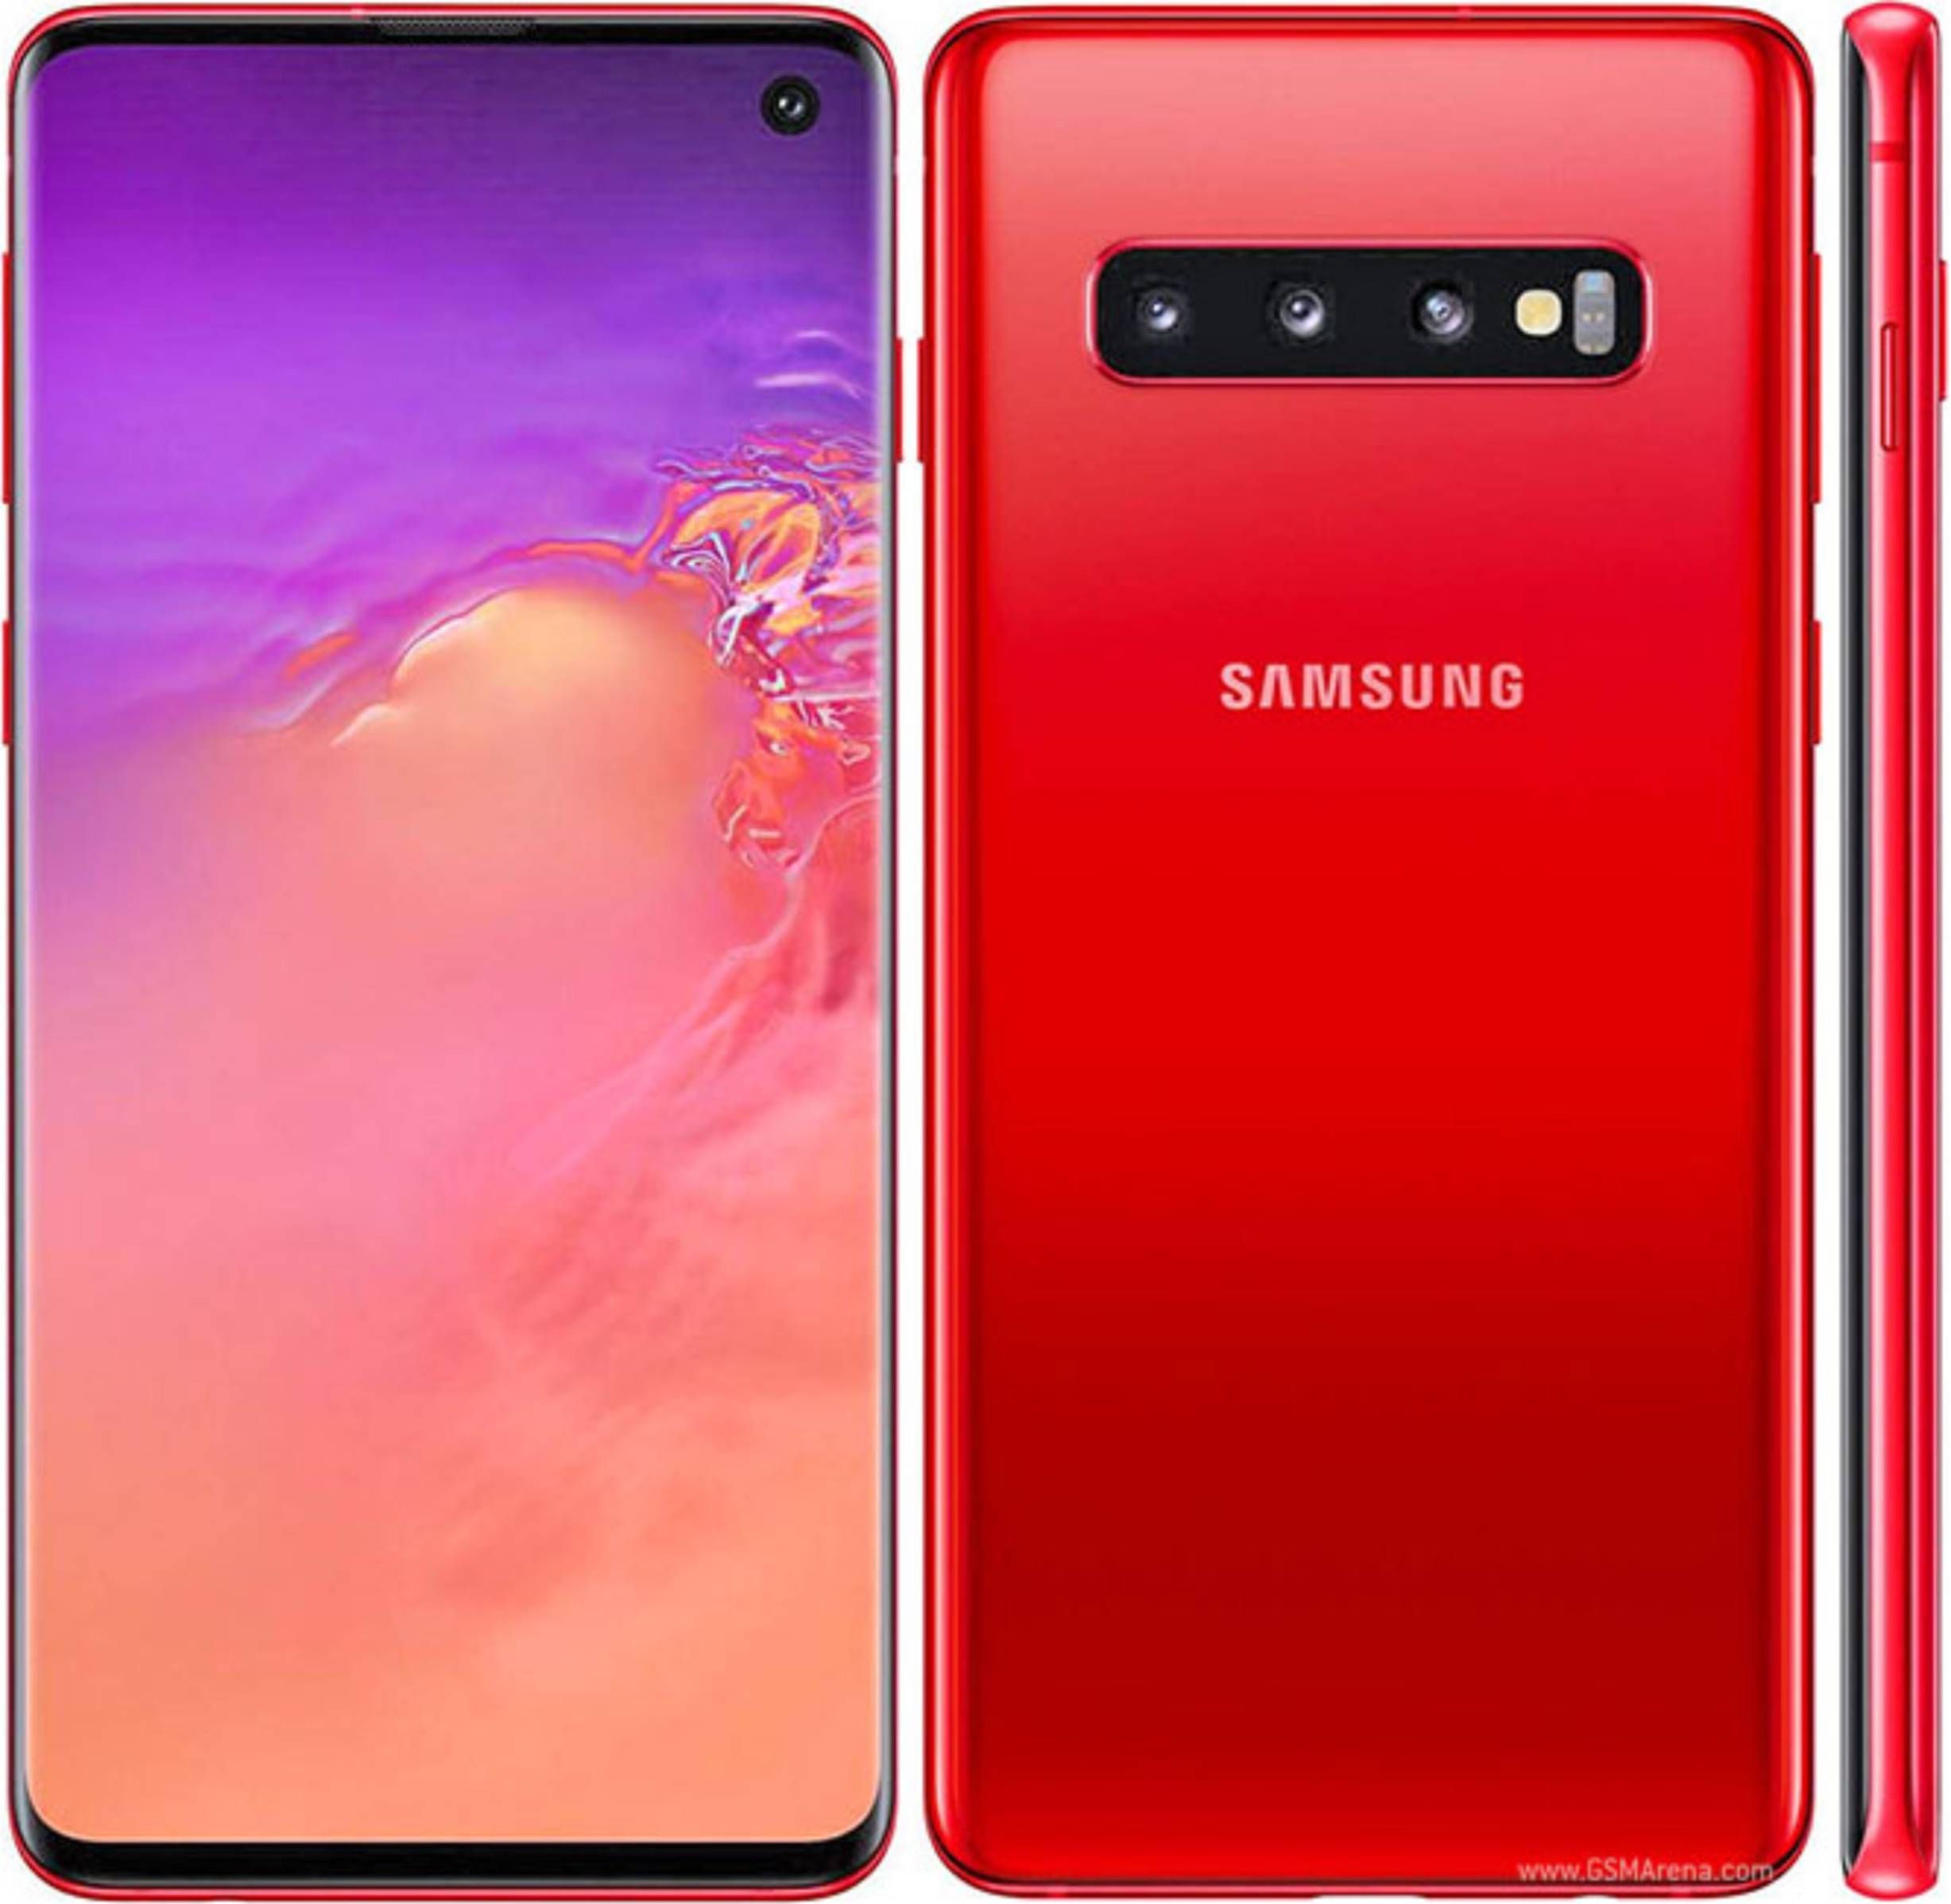 Samsung Galaxy S10 Specifications and Price in Kenya